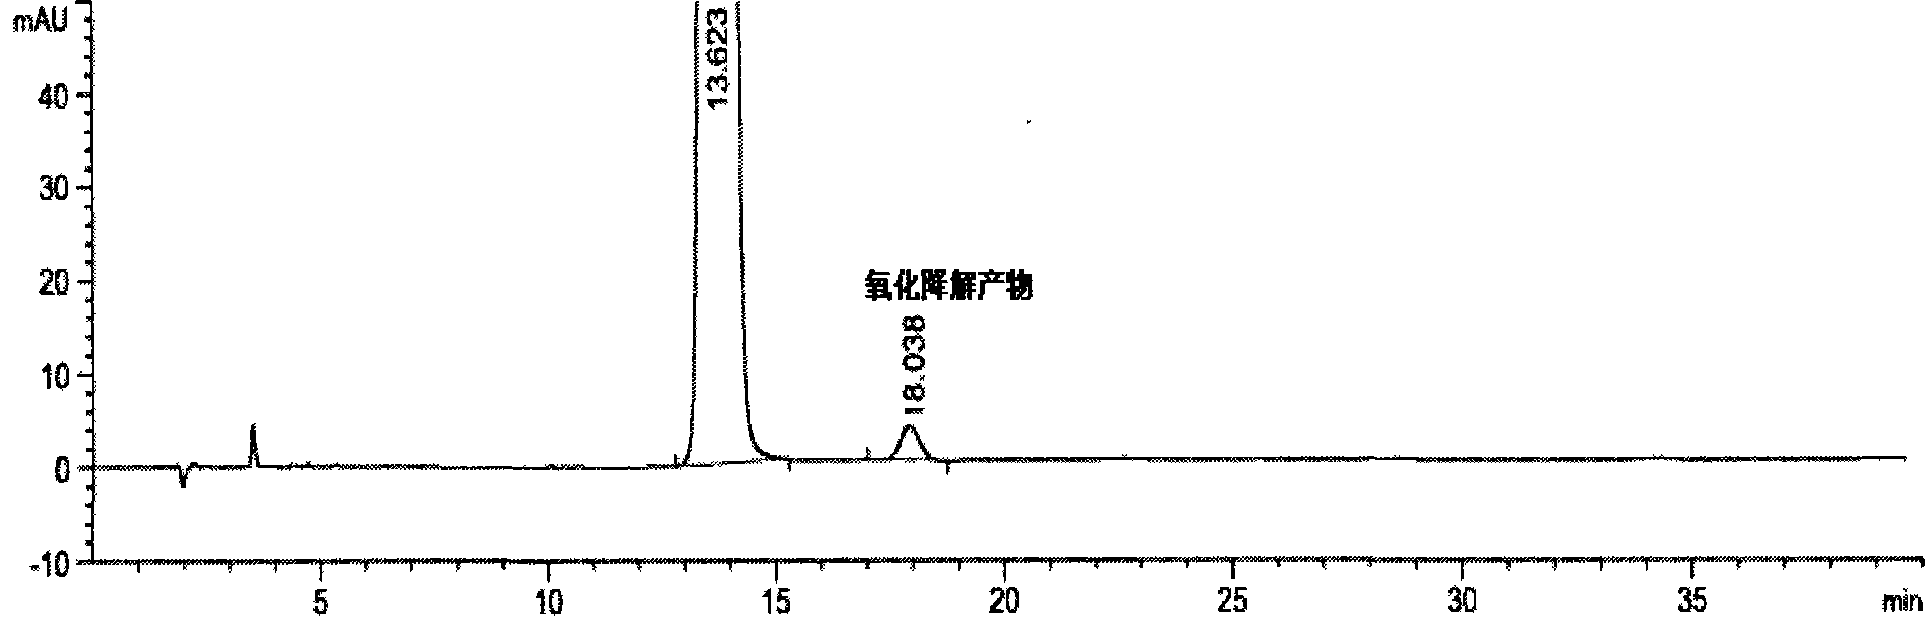 Method for determining content of rosuvastatin calcium and related substances thereof by employing HPLC (high performance liquid chromatography) method